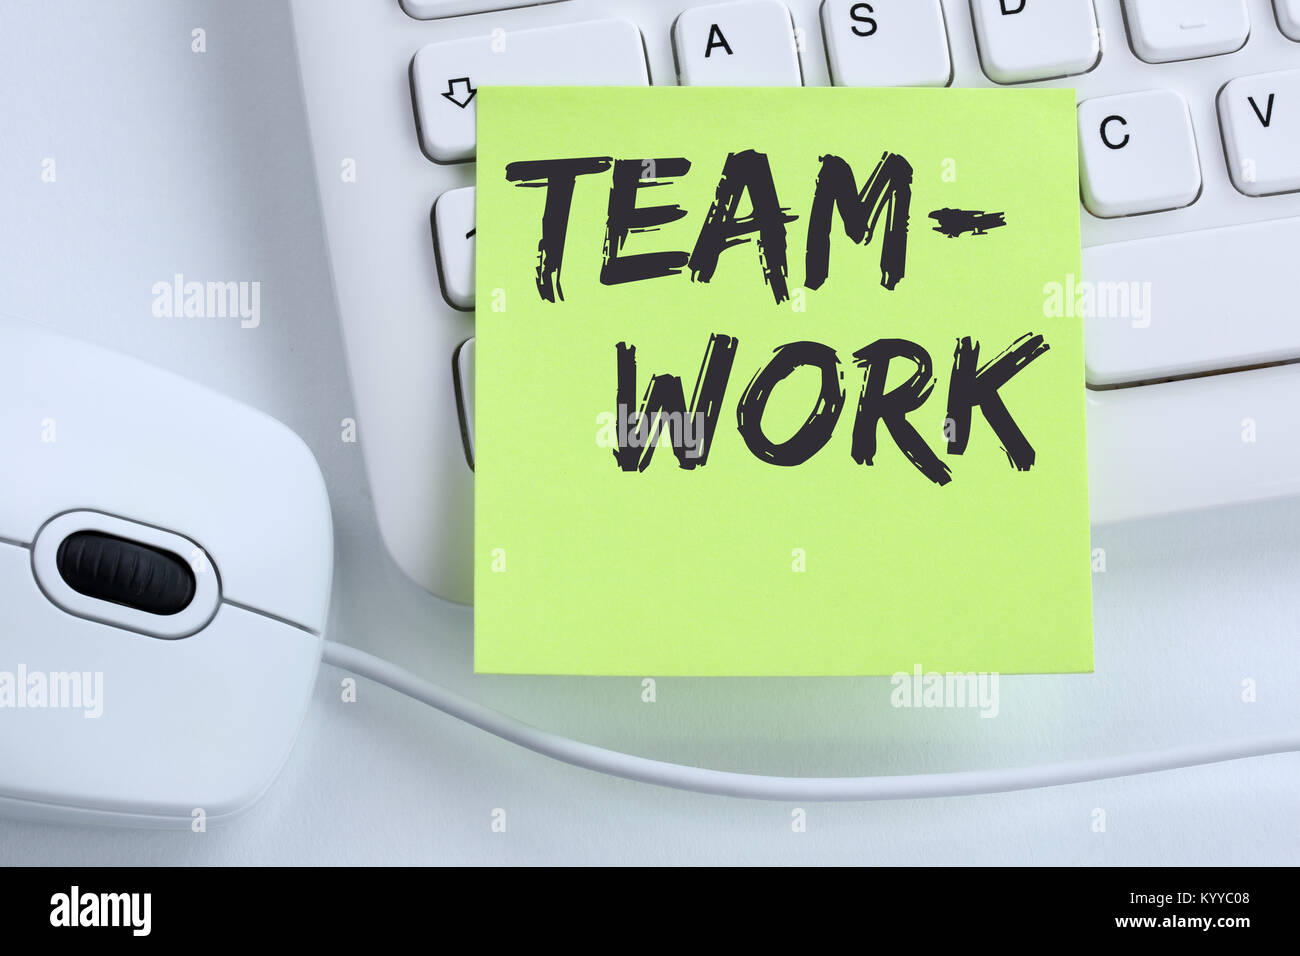 Teamwork team working together business concept success mouse computer keyboard Stock Photo